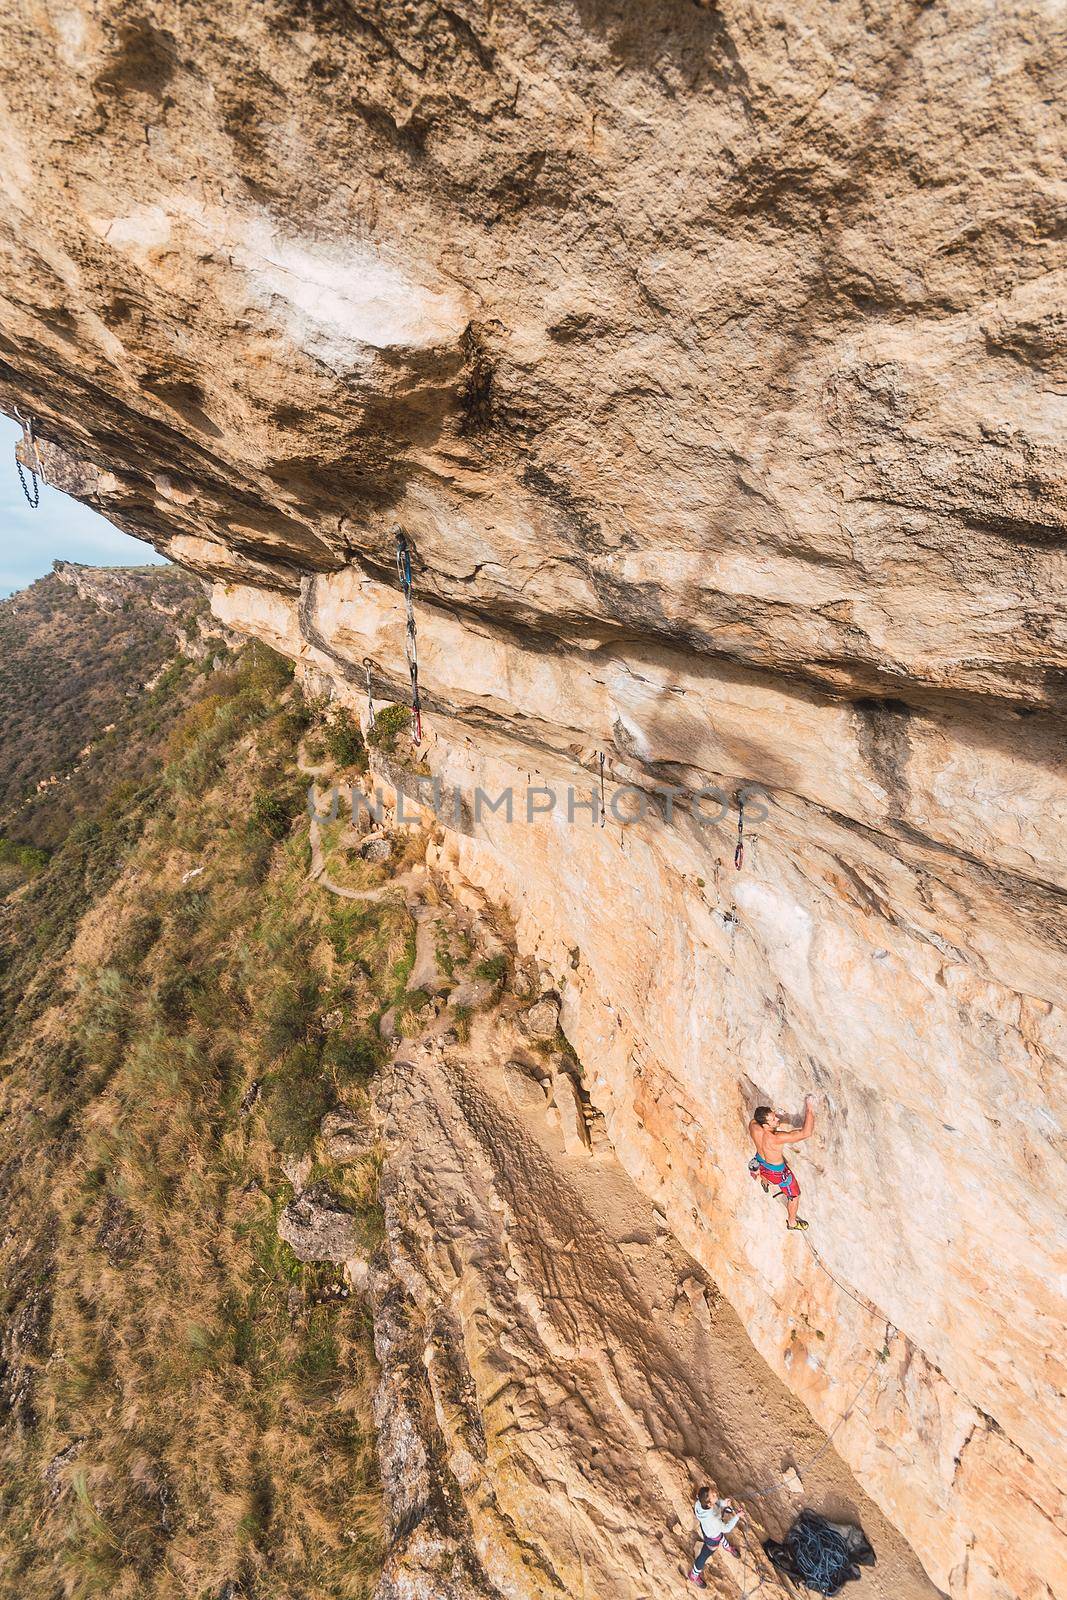 Aerial view of a rock climber climbing a rock formation with people watching from the ground. Vertical view of a climber with bare torso climbing a rock wall.